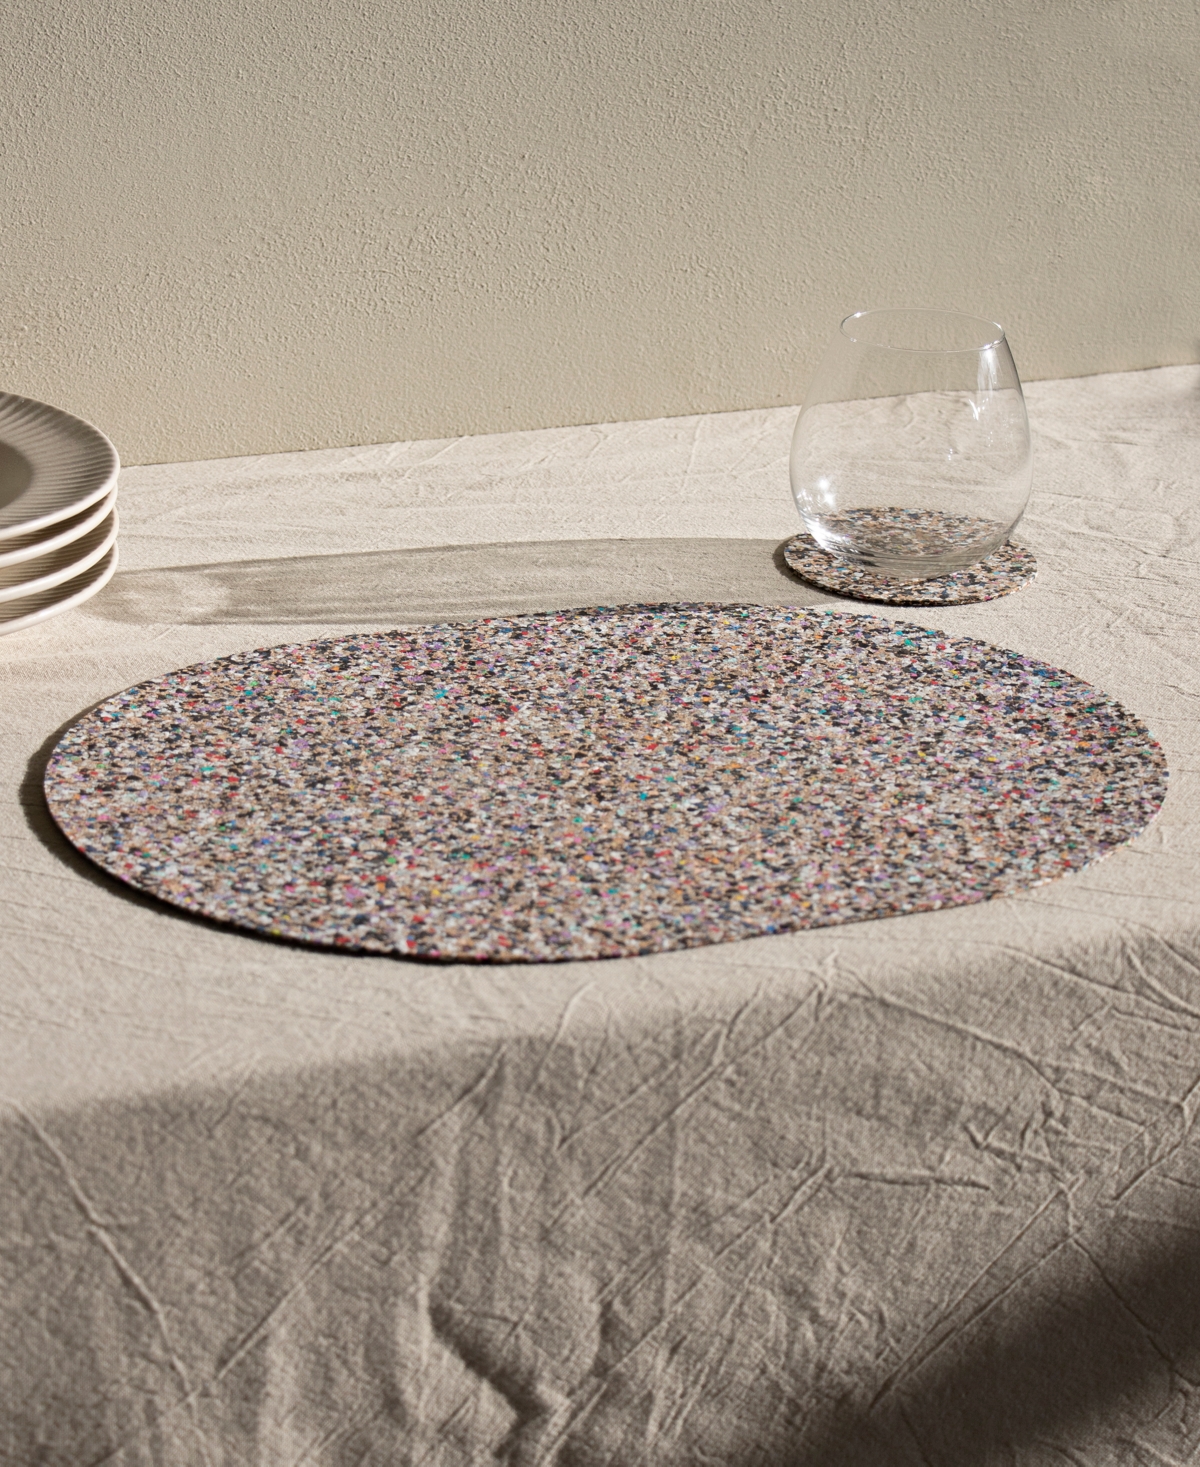 Shop Liga Set Of 4 Oval Beach Clean Placemats In Multi